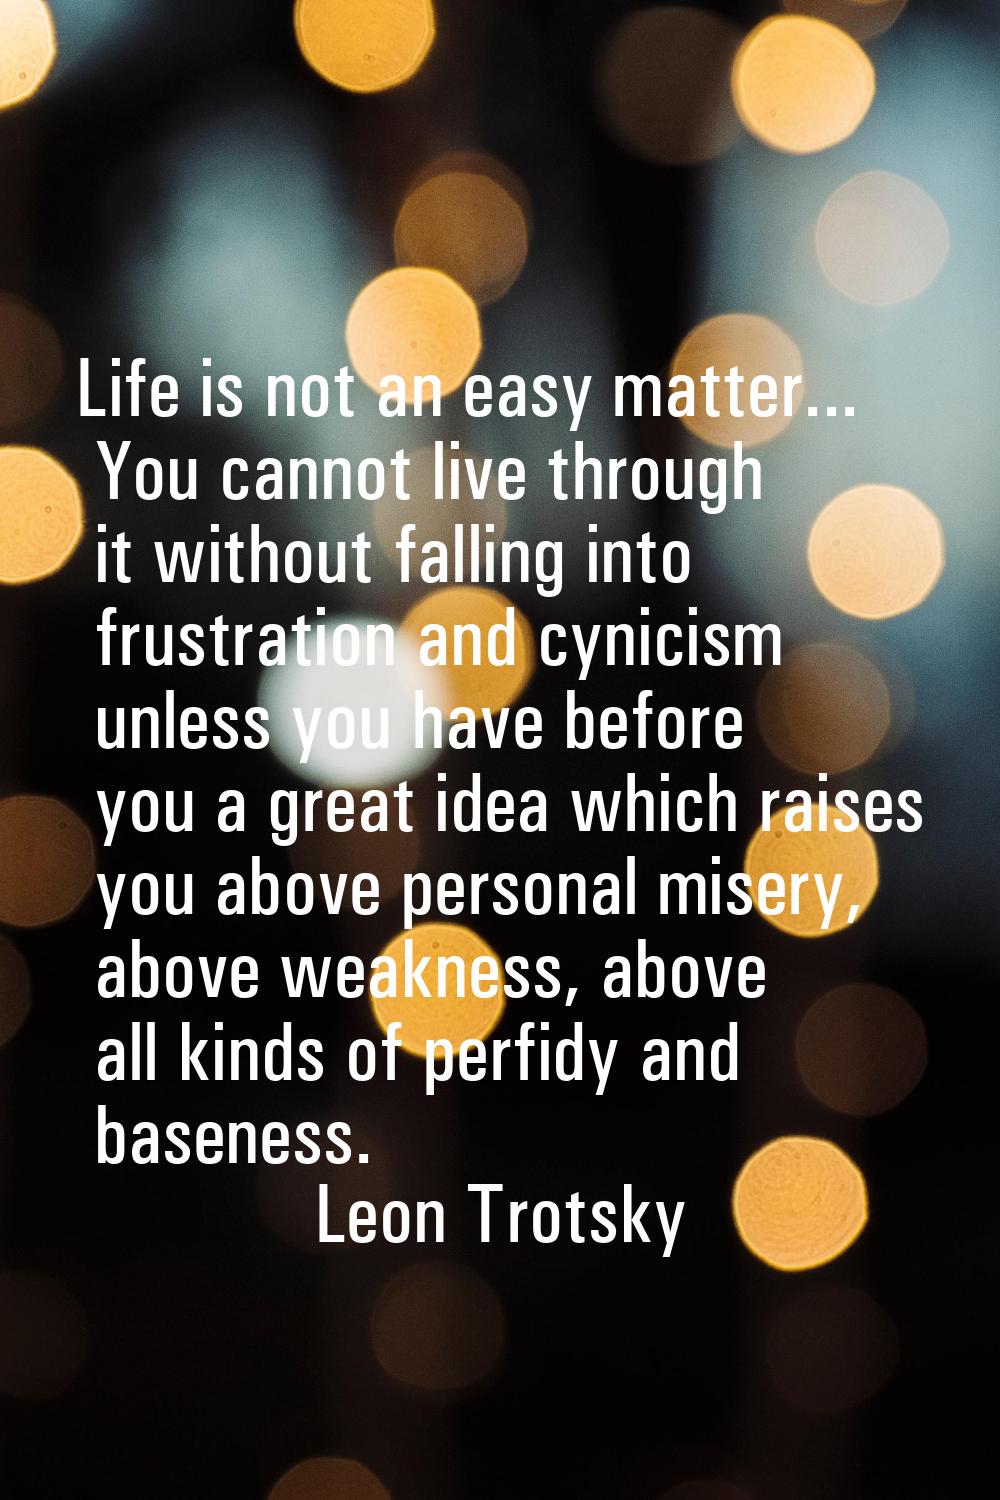 Life is not an easy matter... You cannot live through it without falling into frustration and cynic